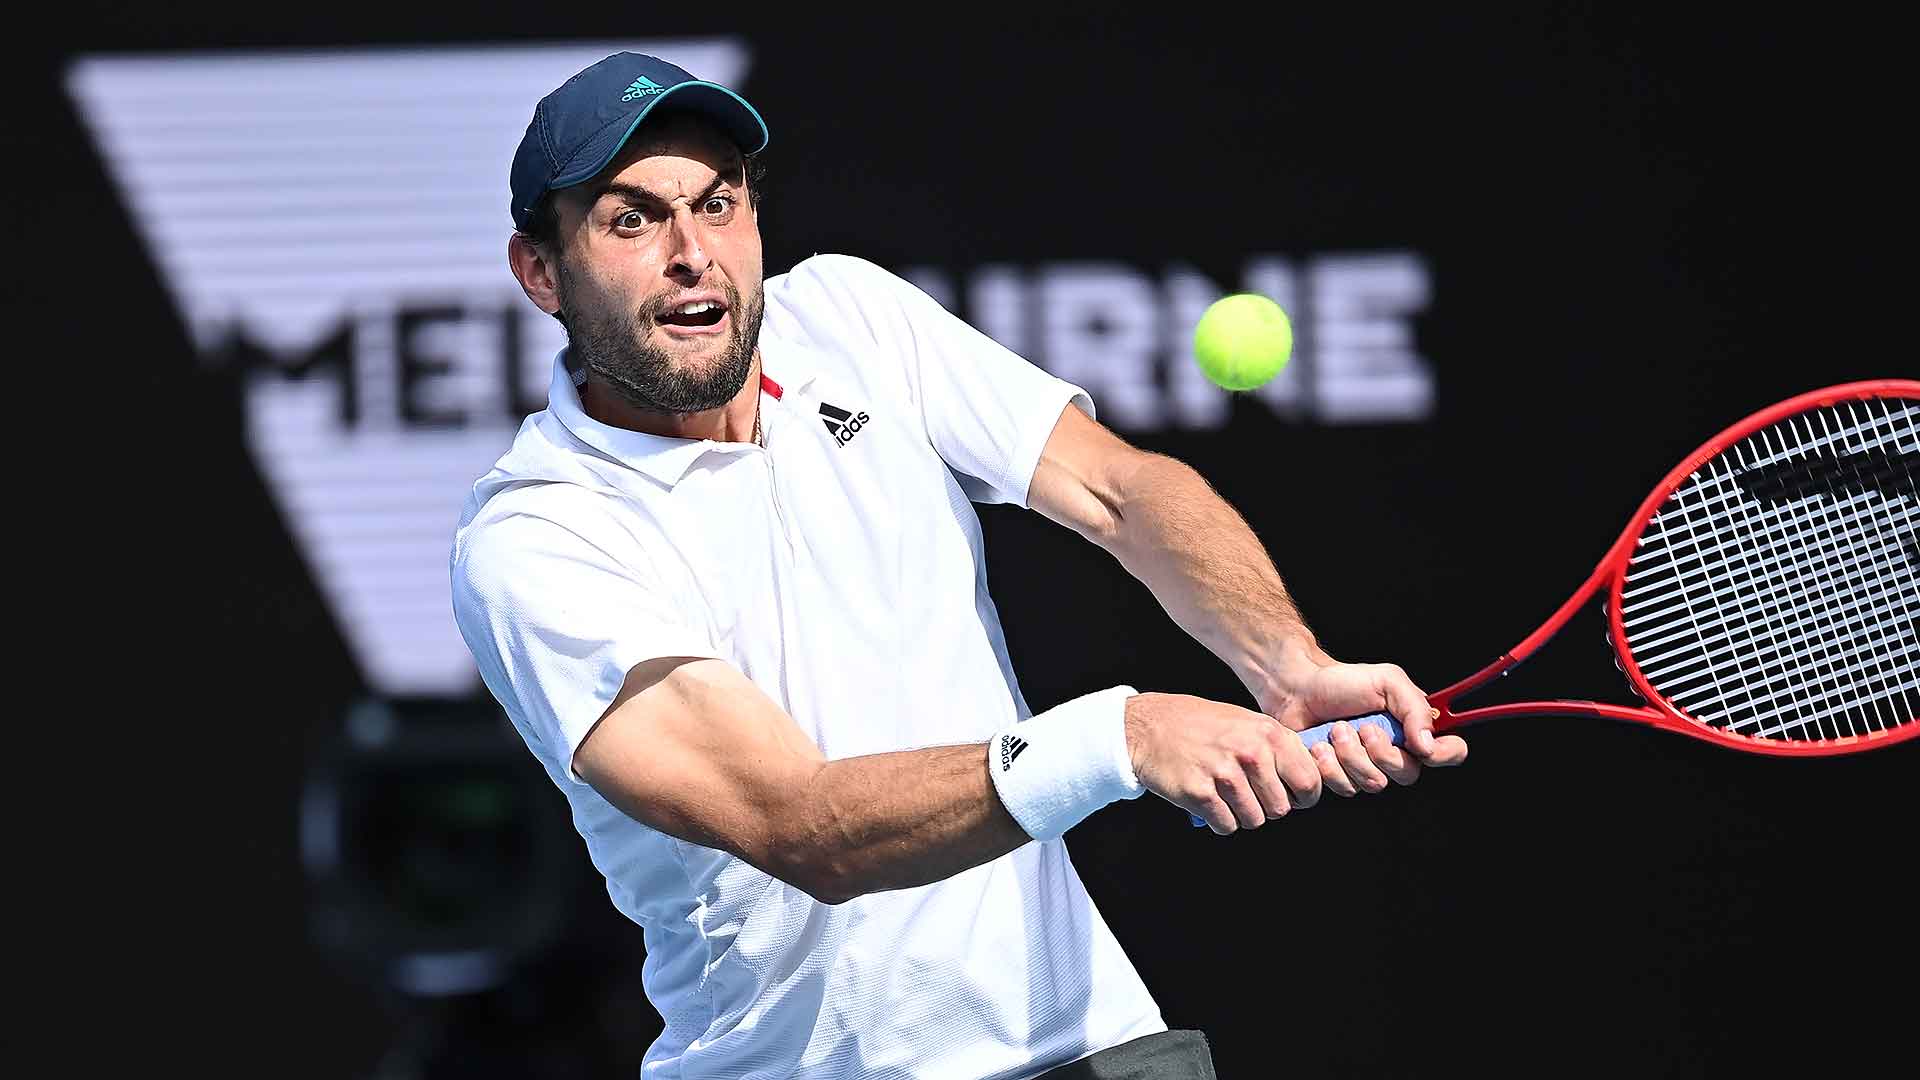 Aslan Karatsev becomes the first man in the Open Era to reach the semi-finals on his Grand Slam debut on Tuesday at the Australian Open.